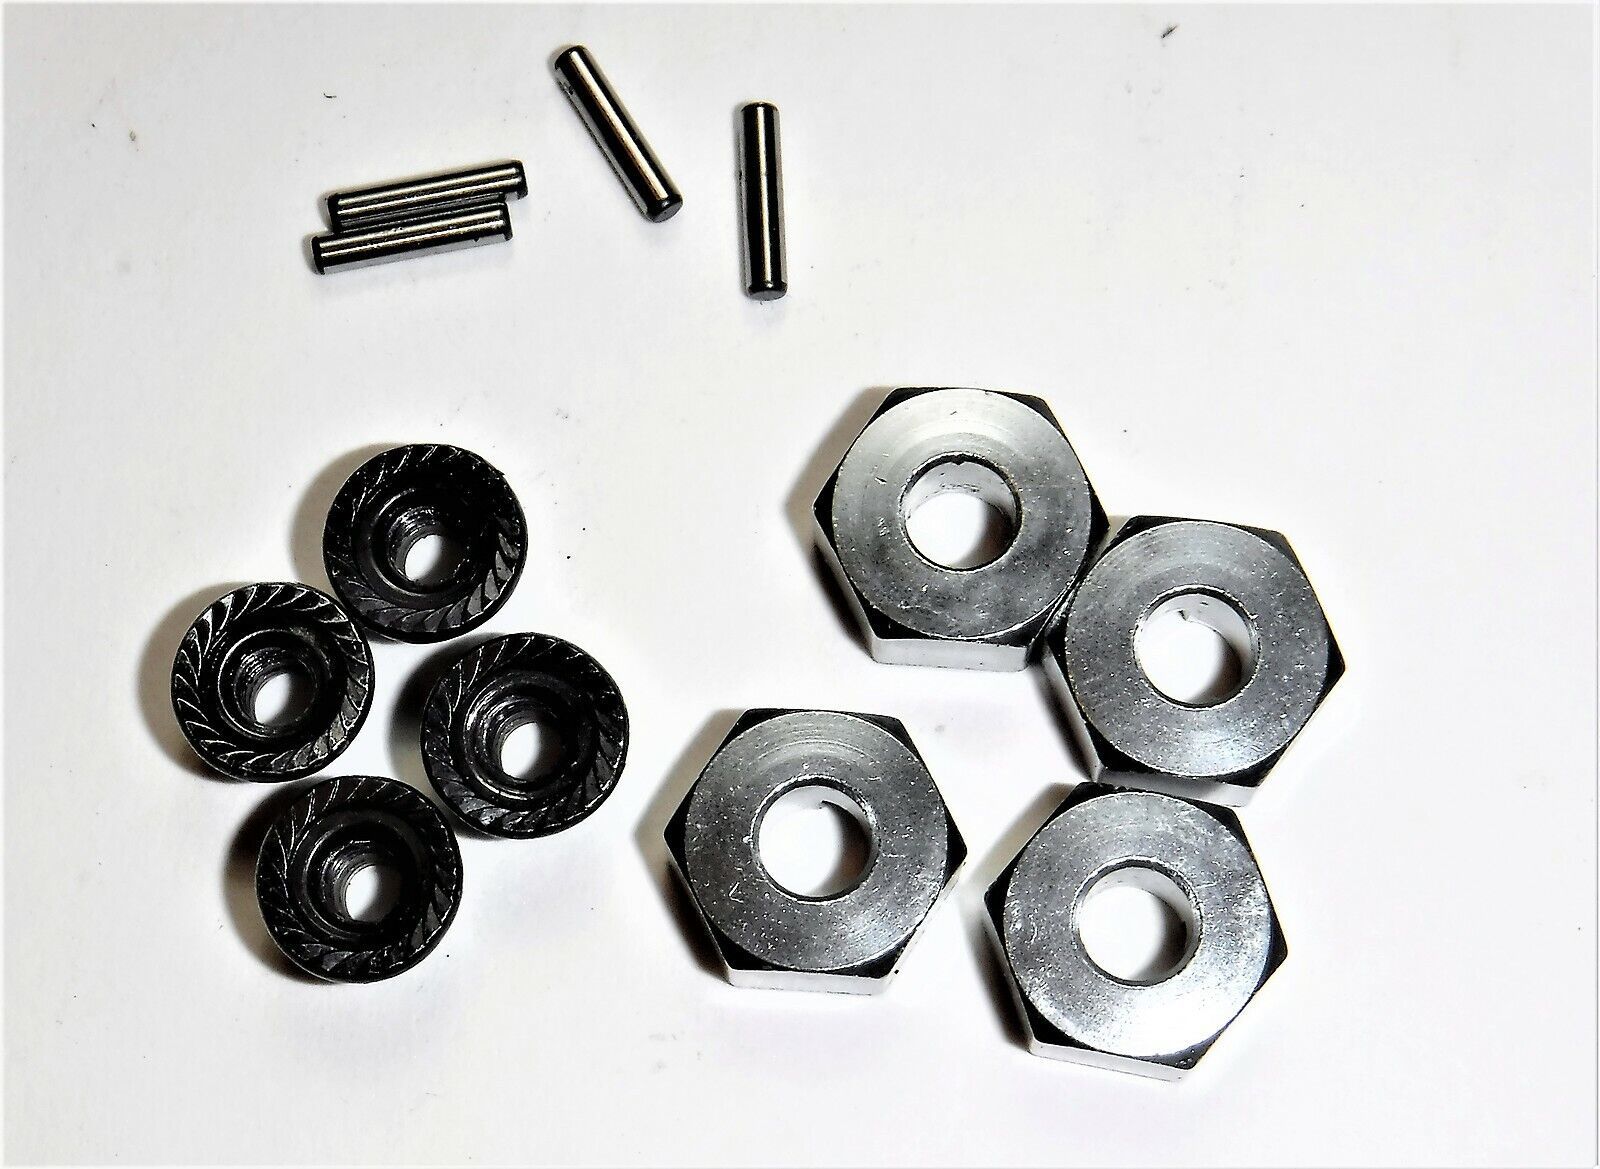 Primary image for Redcat Racing Everest GEN 7 Pro 1/10 Scale Hex Hubs Nuts Pins